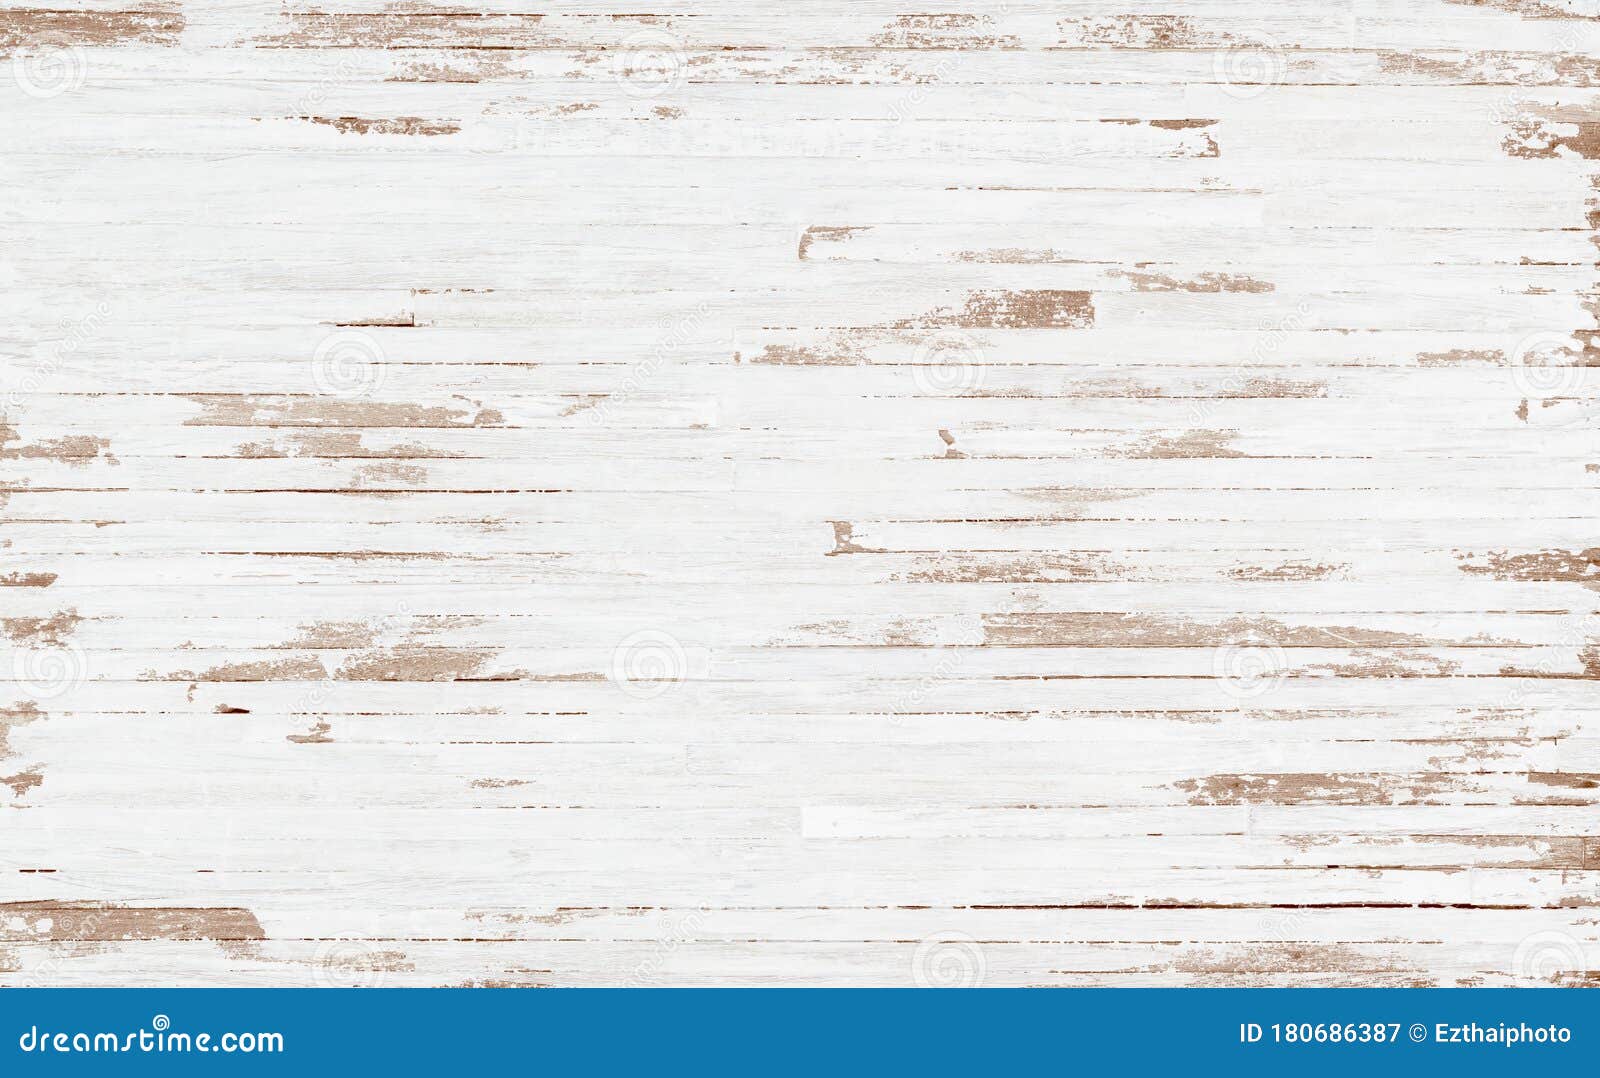 white rustic wood  texture background. top view background of light rusty wooden planks. grunge  of weathered painted wooden plank